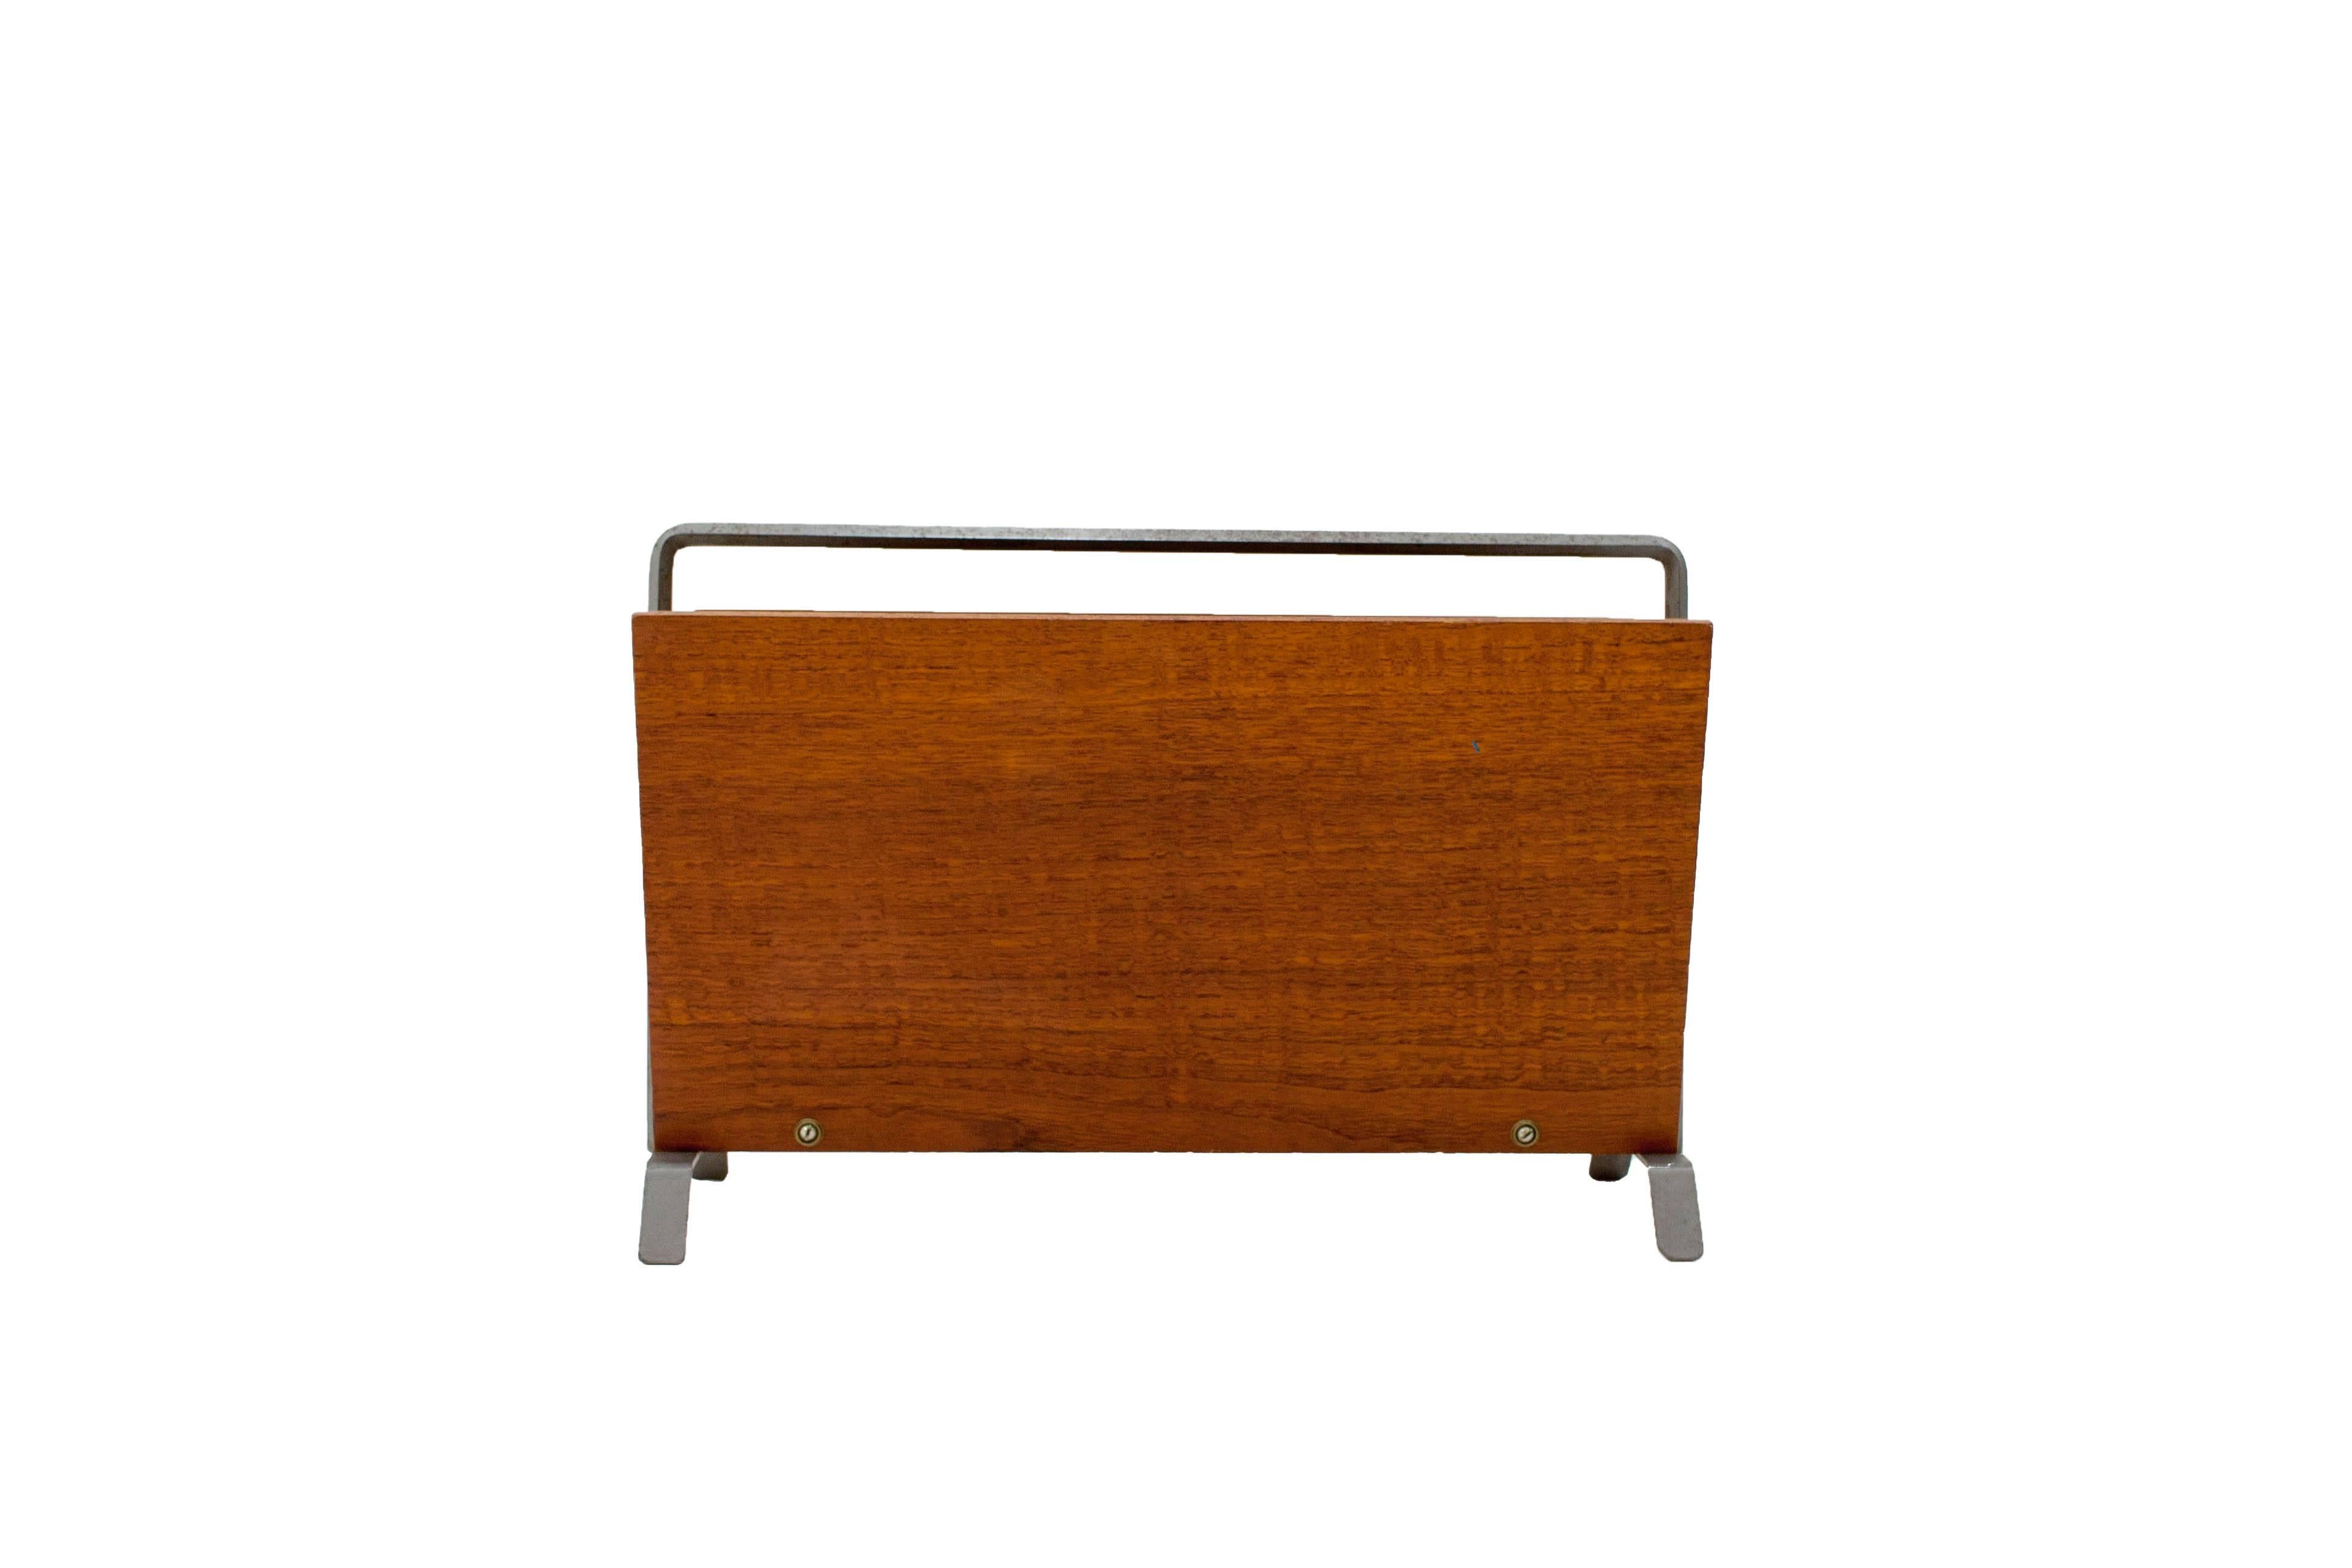 Striking minimalist magazine rack from the early 1960s. Teak with a six-sided bent metal handle.